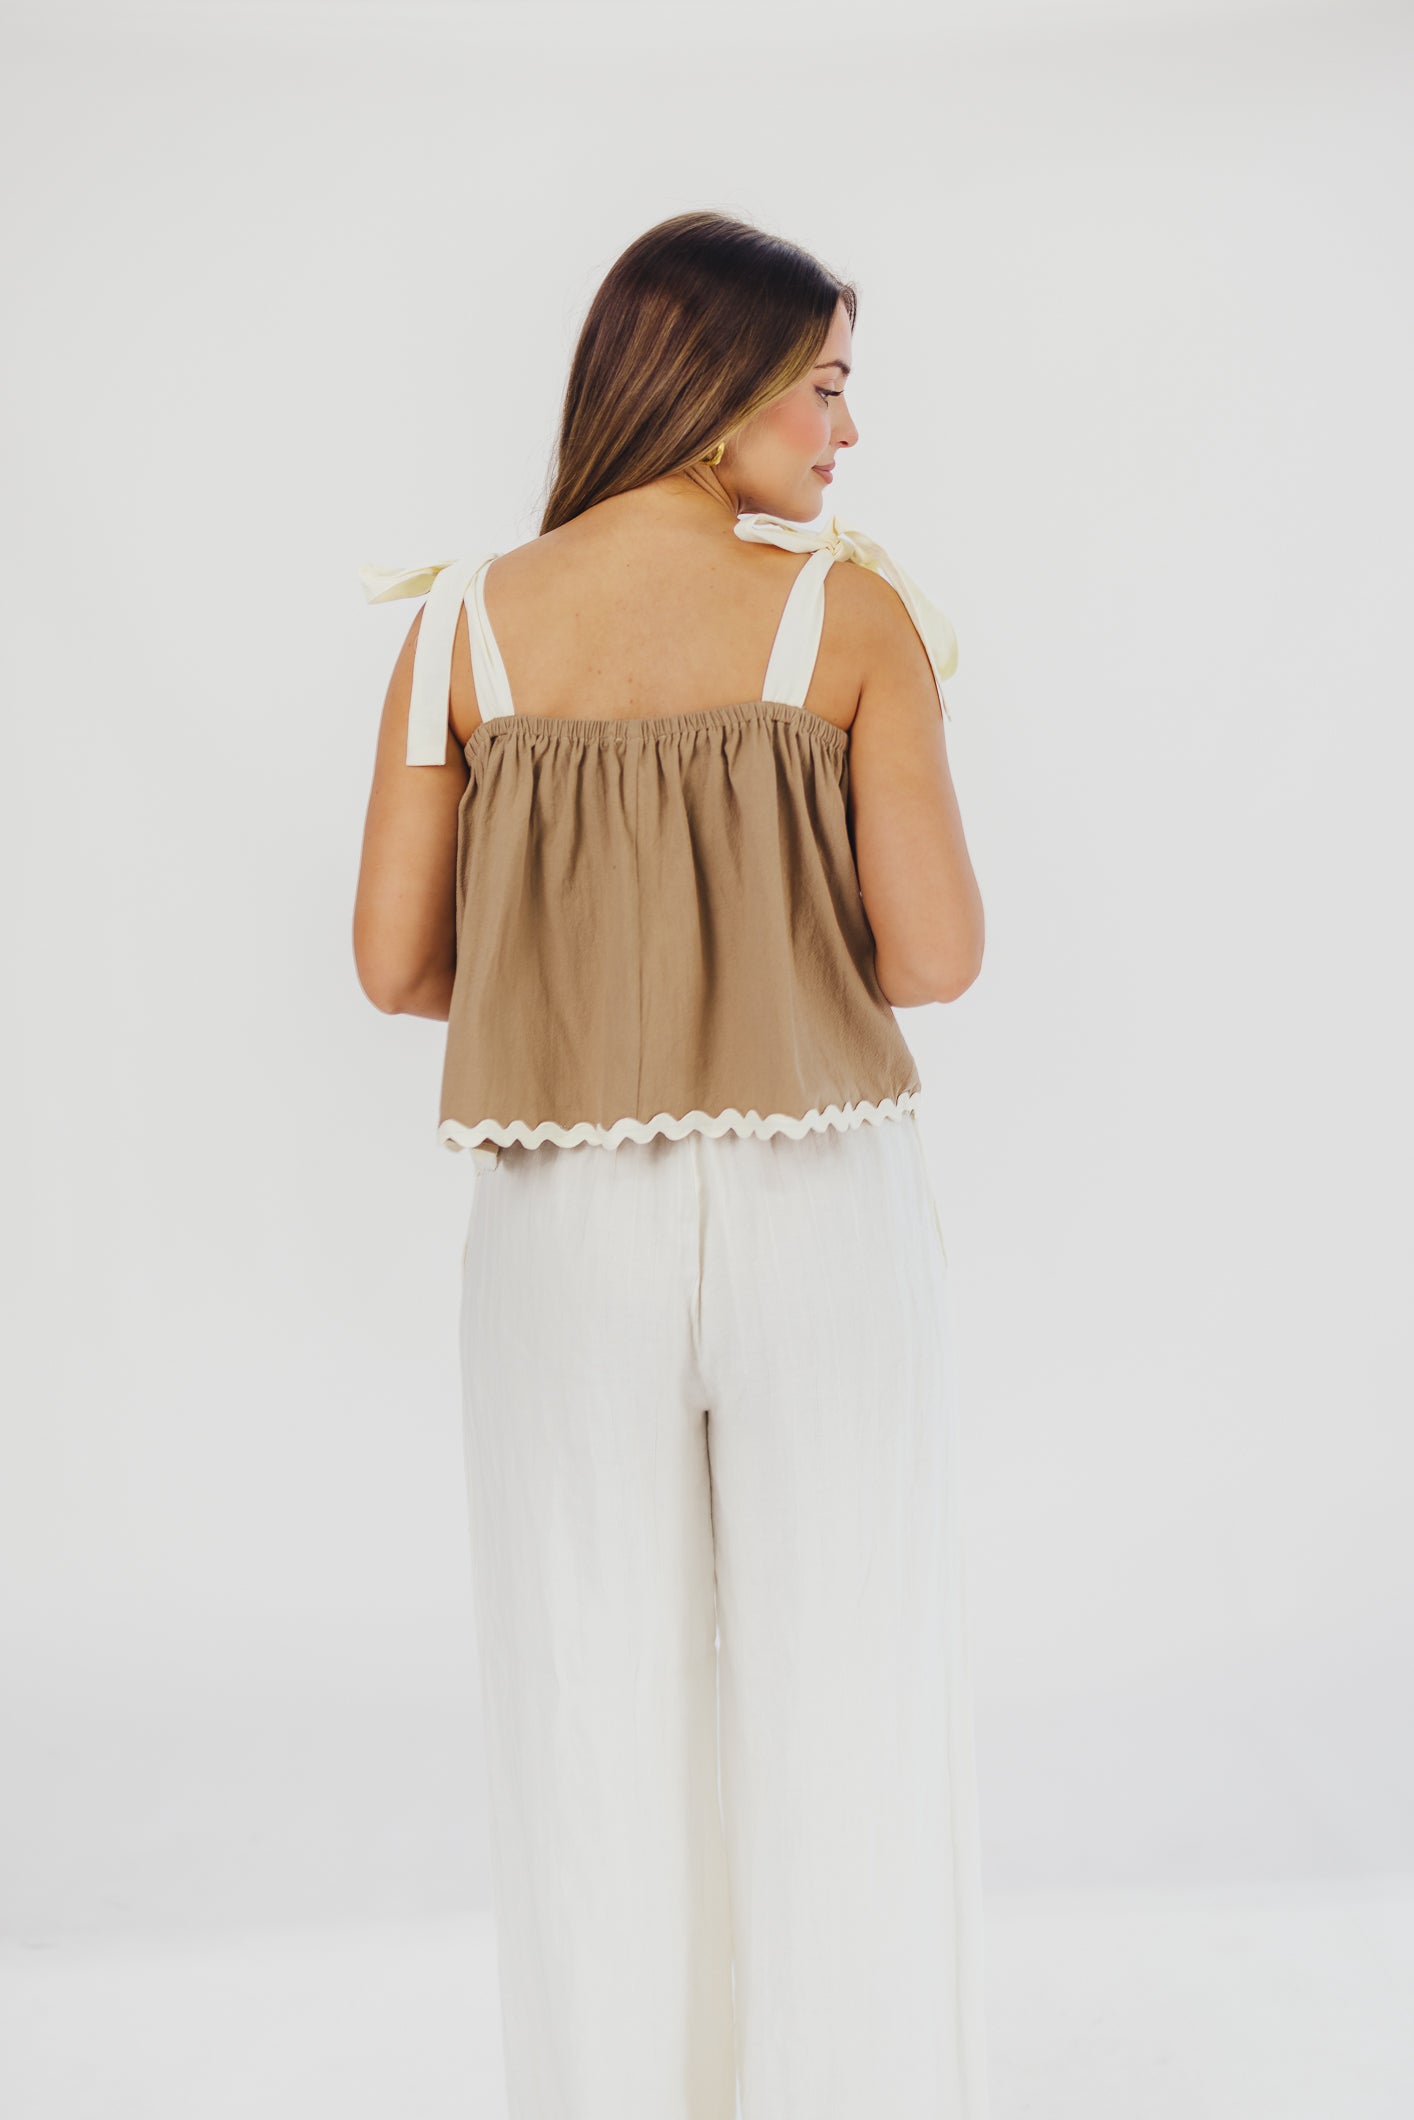 Ginger Ric Rac Cami Top with Shoulder Tie in Mocha